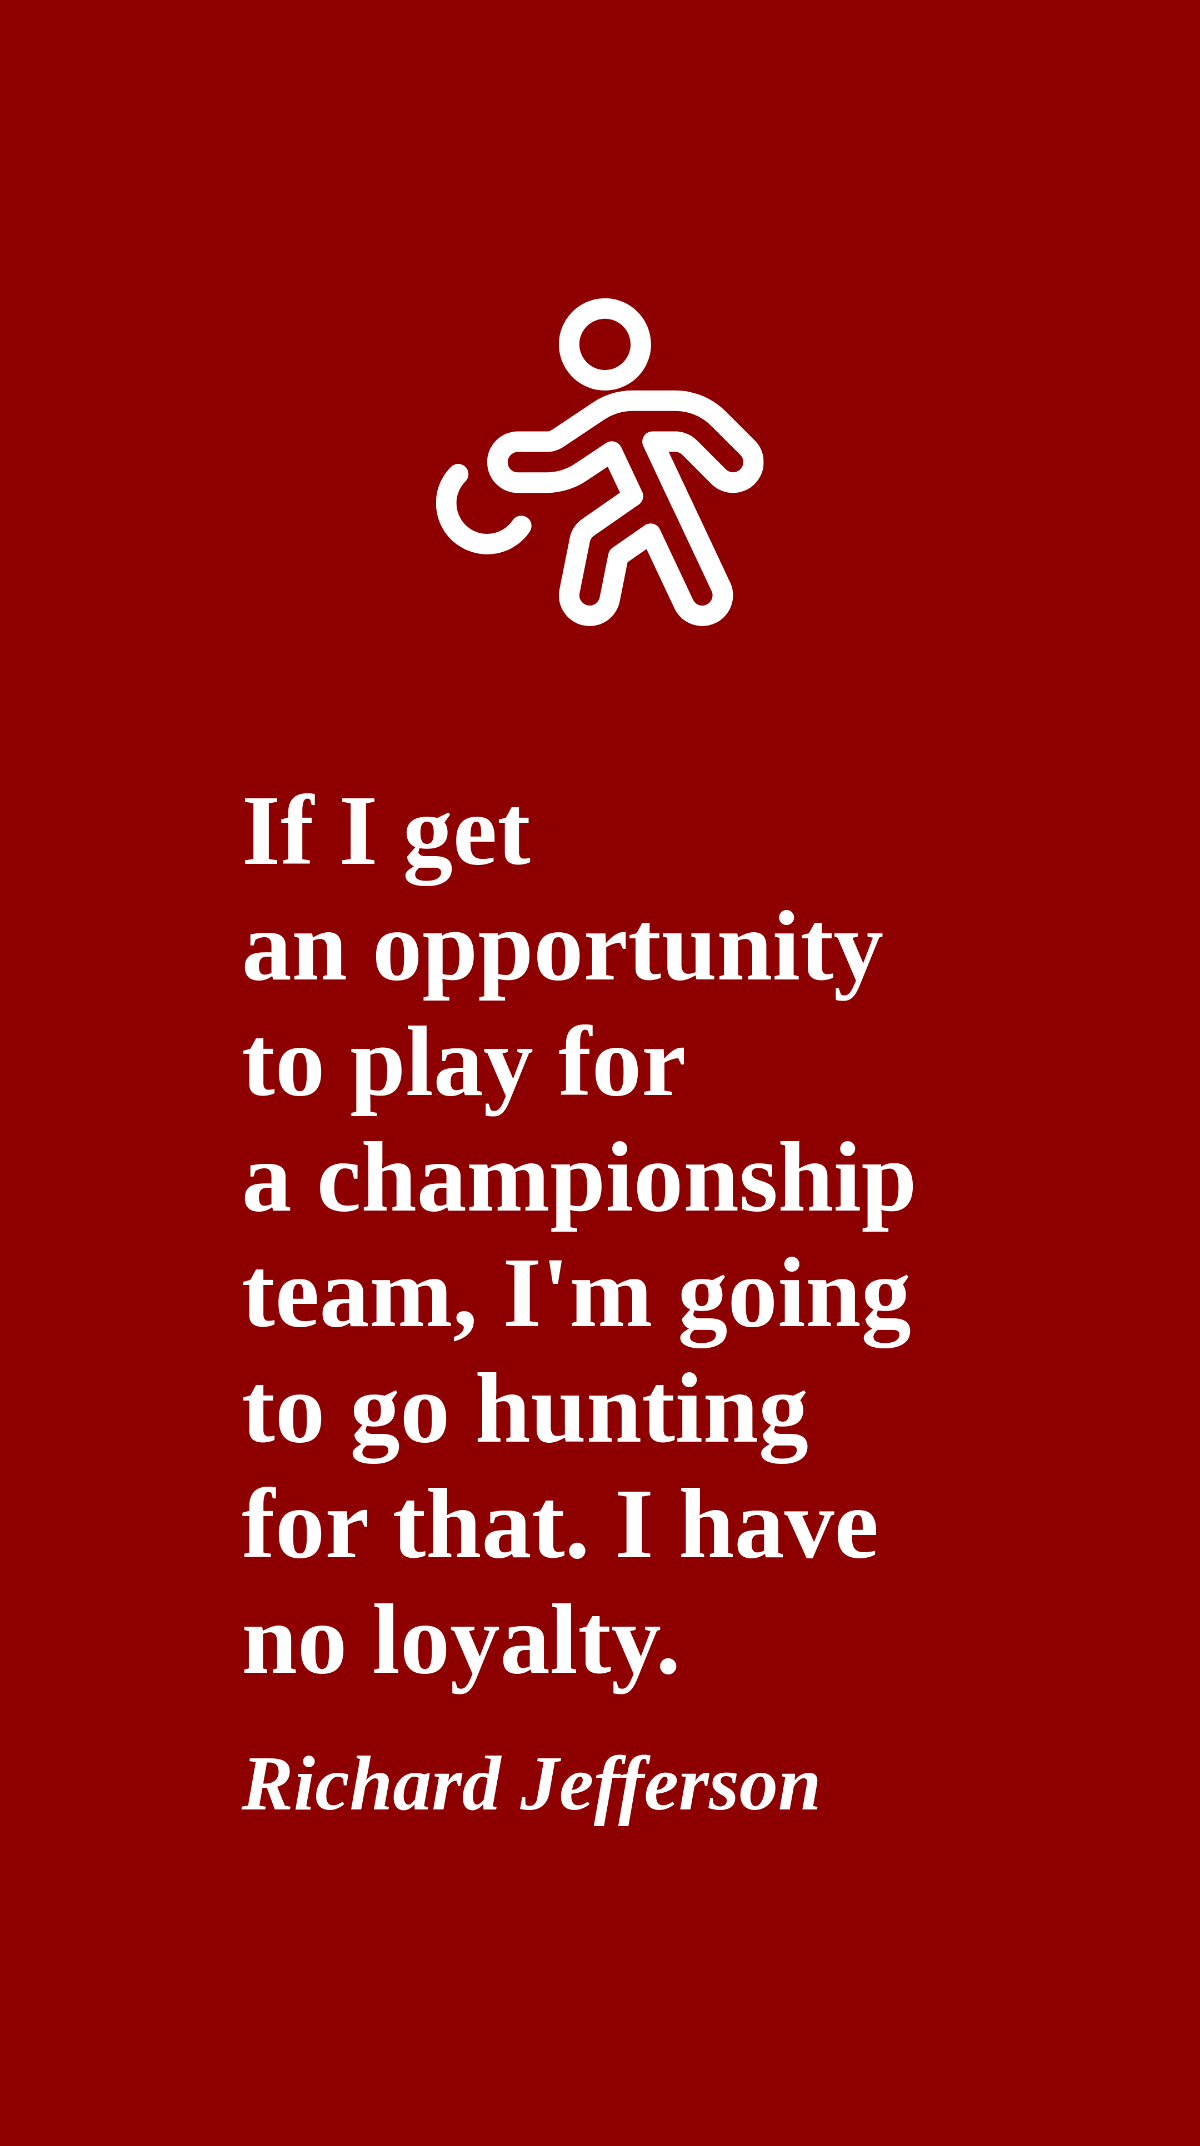 Richard Jefferson - If I get an opportunity to play for a championship team, I'm going to go hunting for that. I have no loyalty.